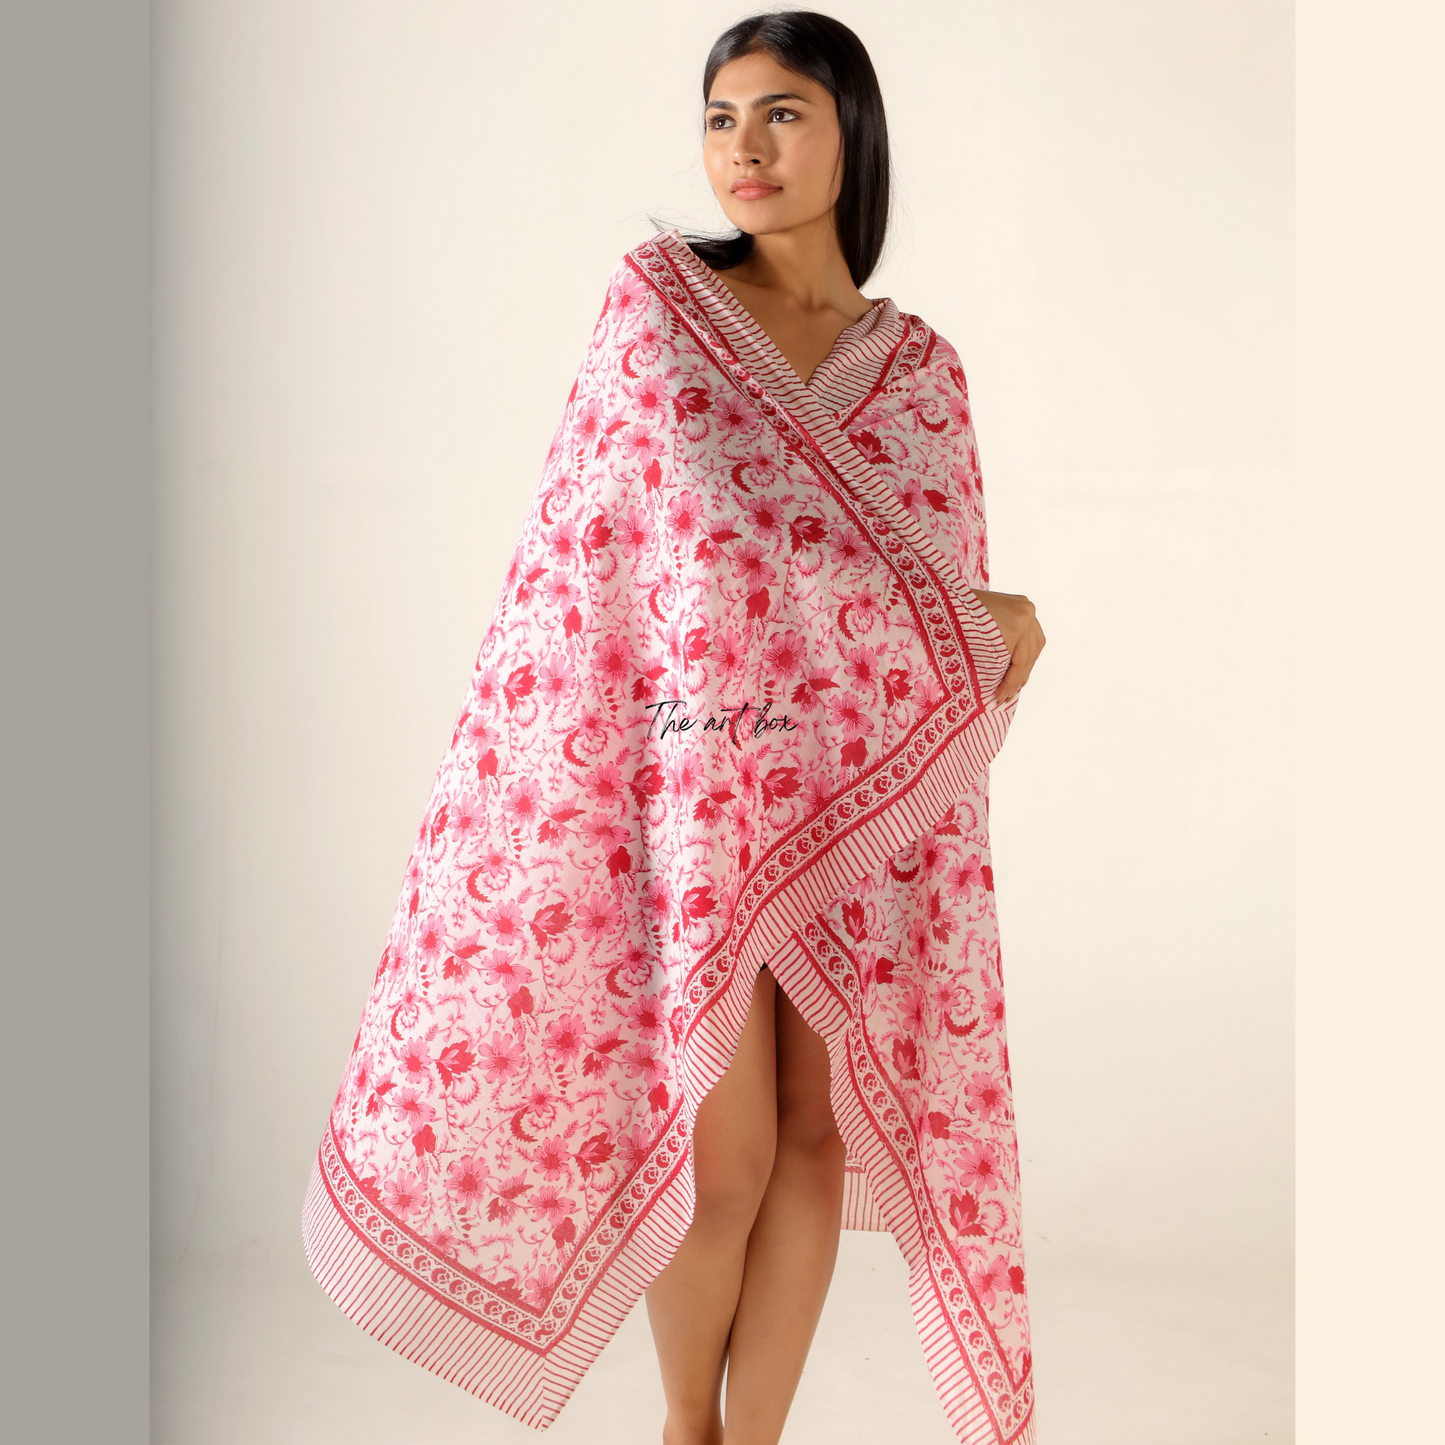 Hibiscus Haven: Floral Sarong Pareo for Island Adventures